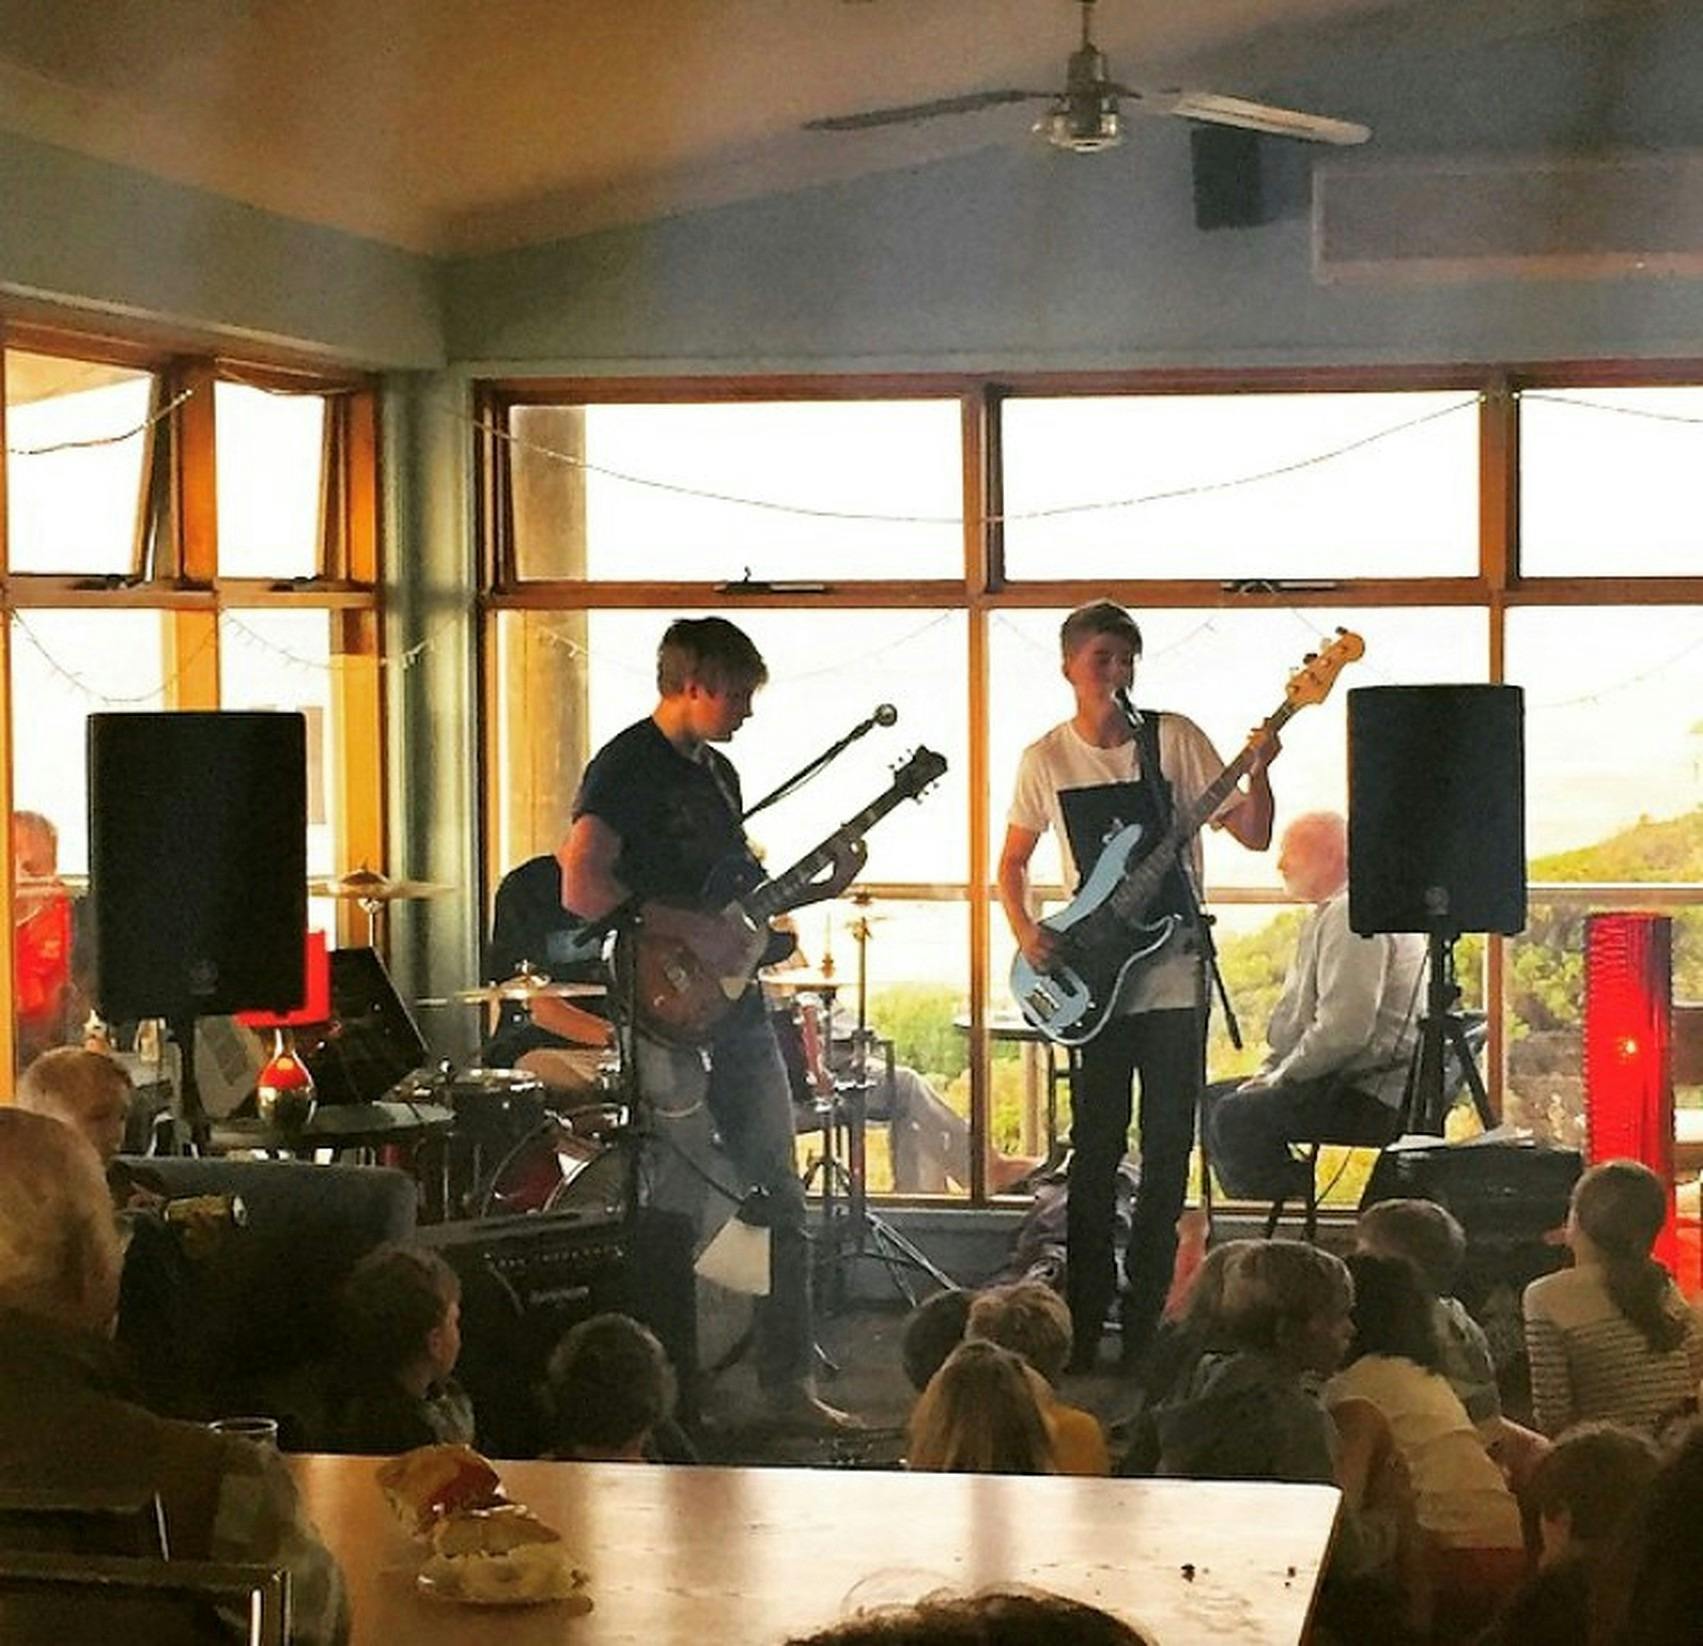 Grooving to some tunes at the Normanville Surf Lifesaving Club Rooms & Bar